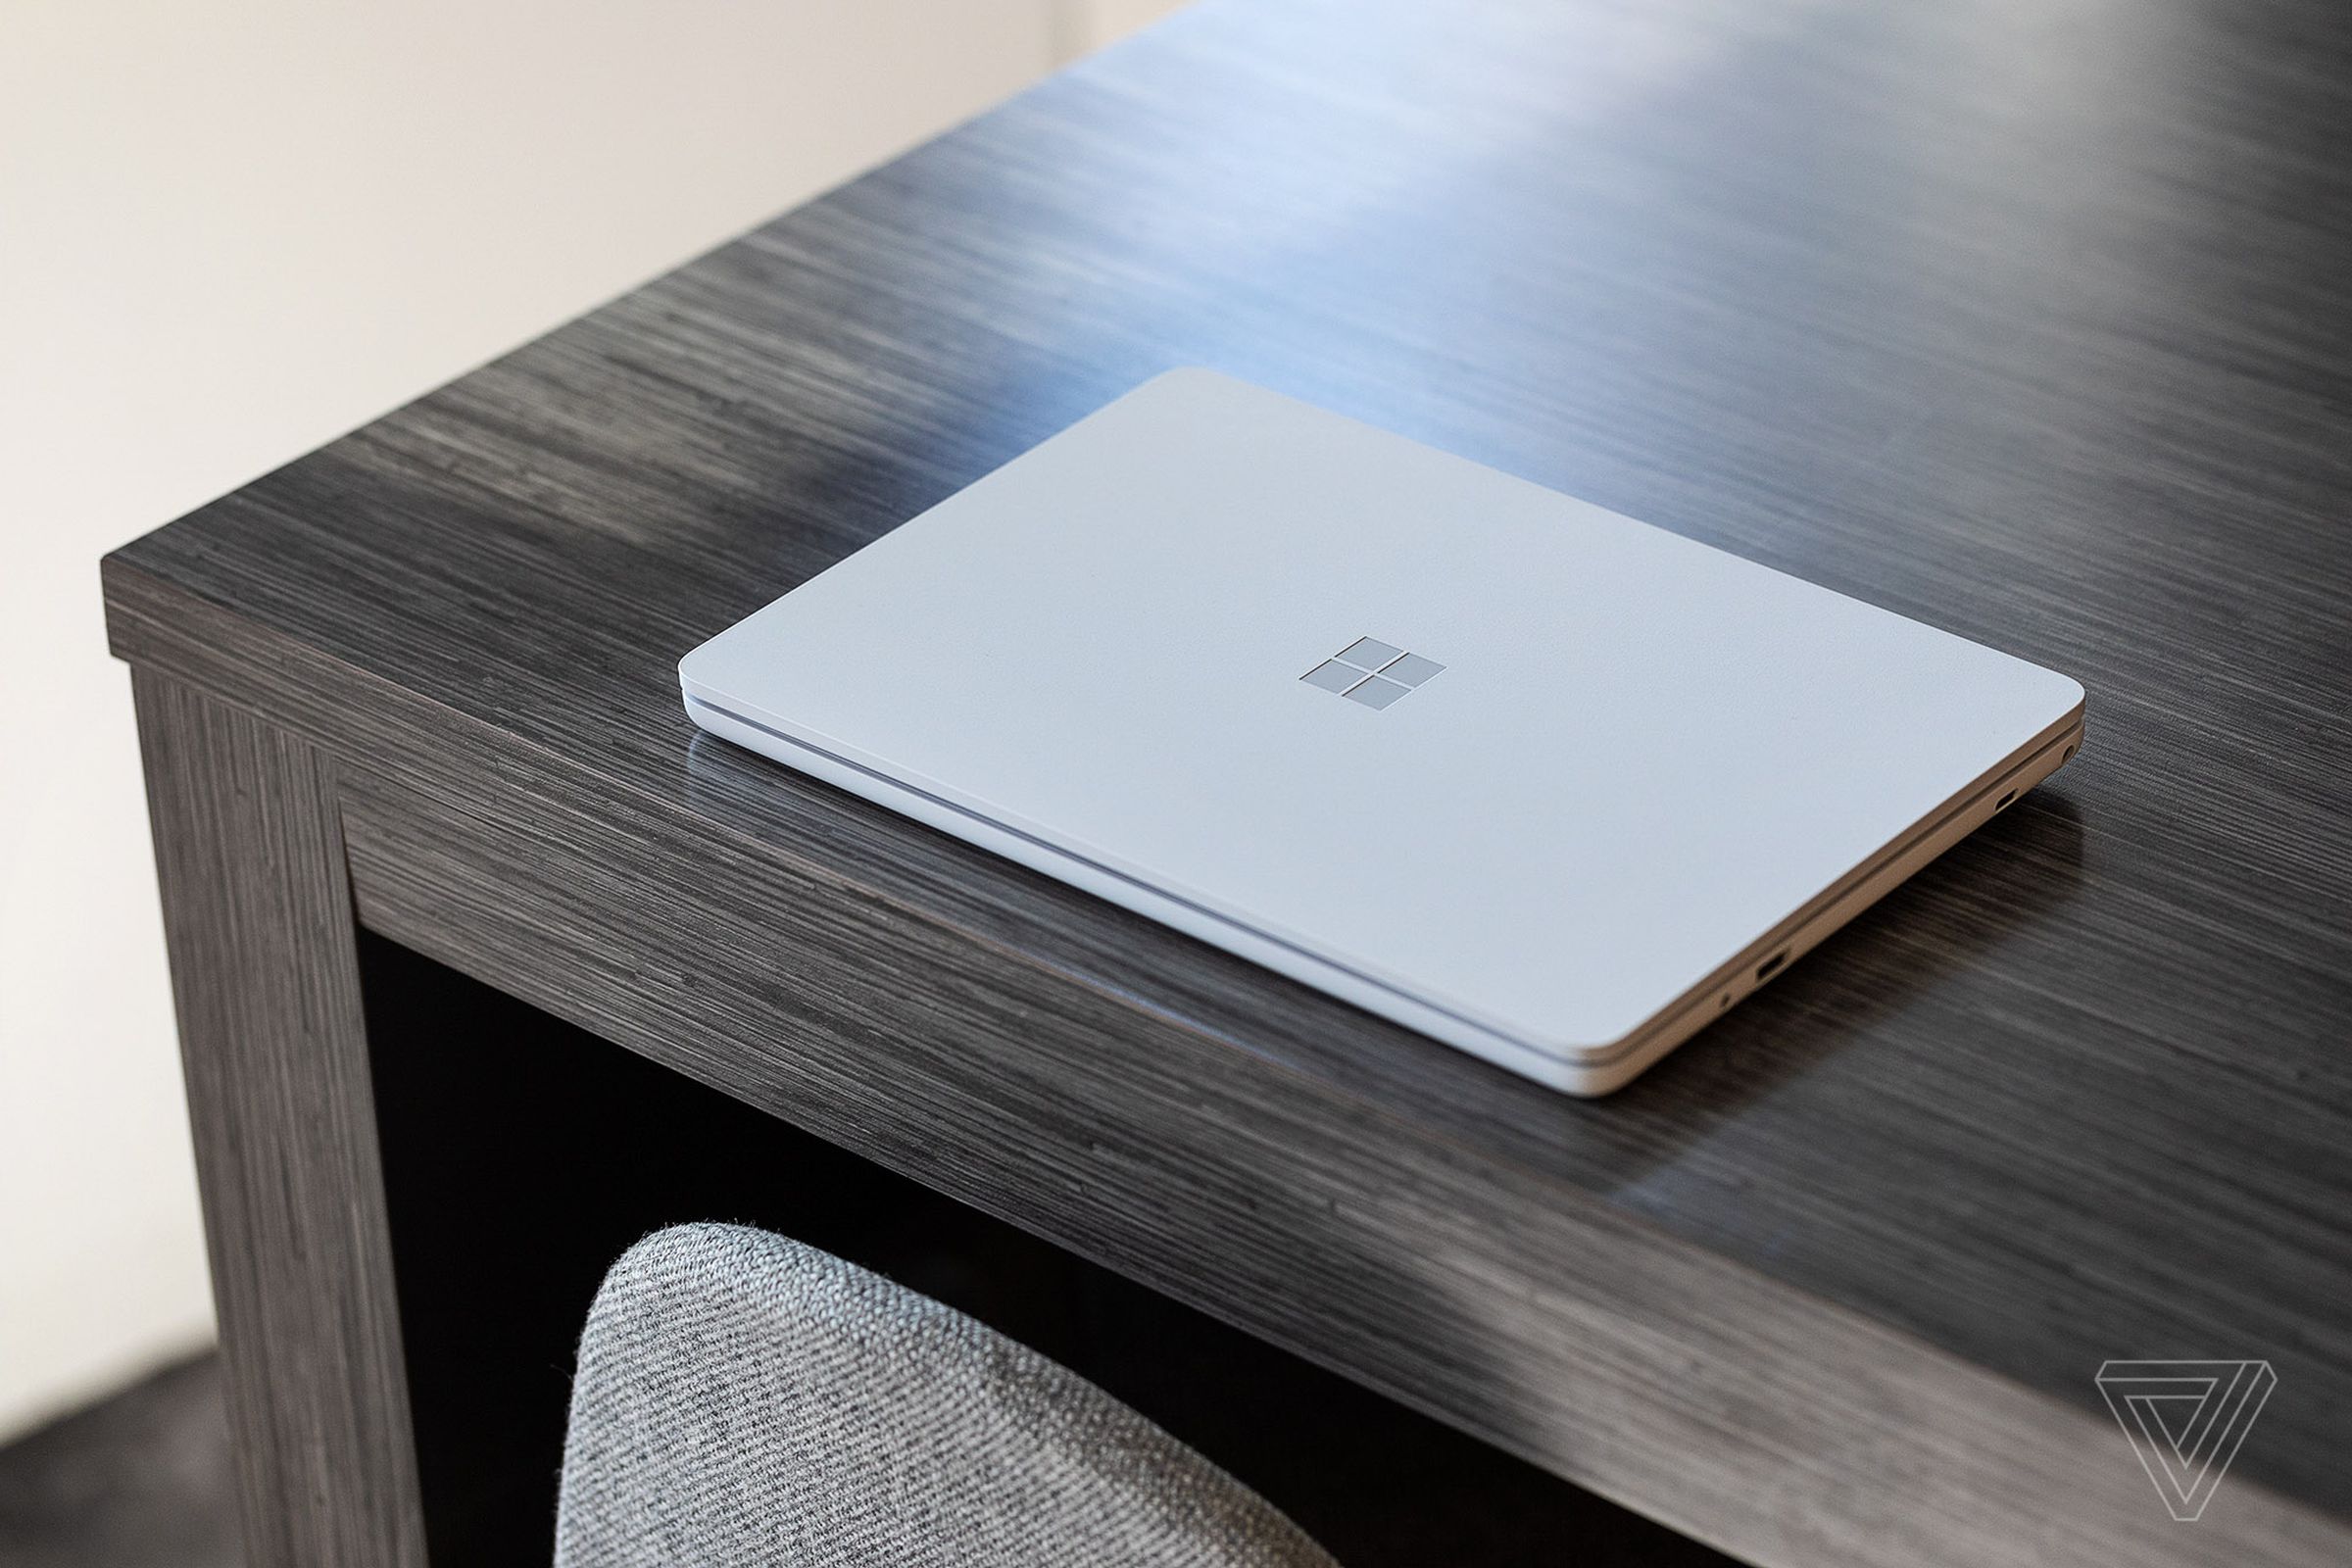 The Surface Laptop SE closed, seen from above, on the edge of a wooden table.